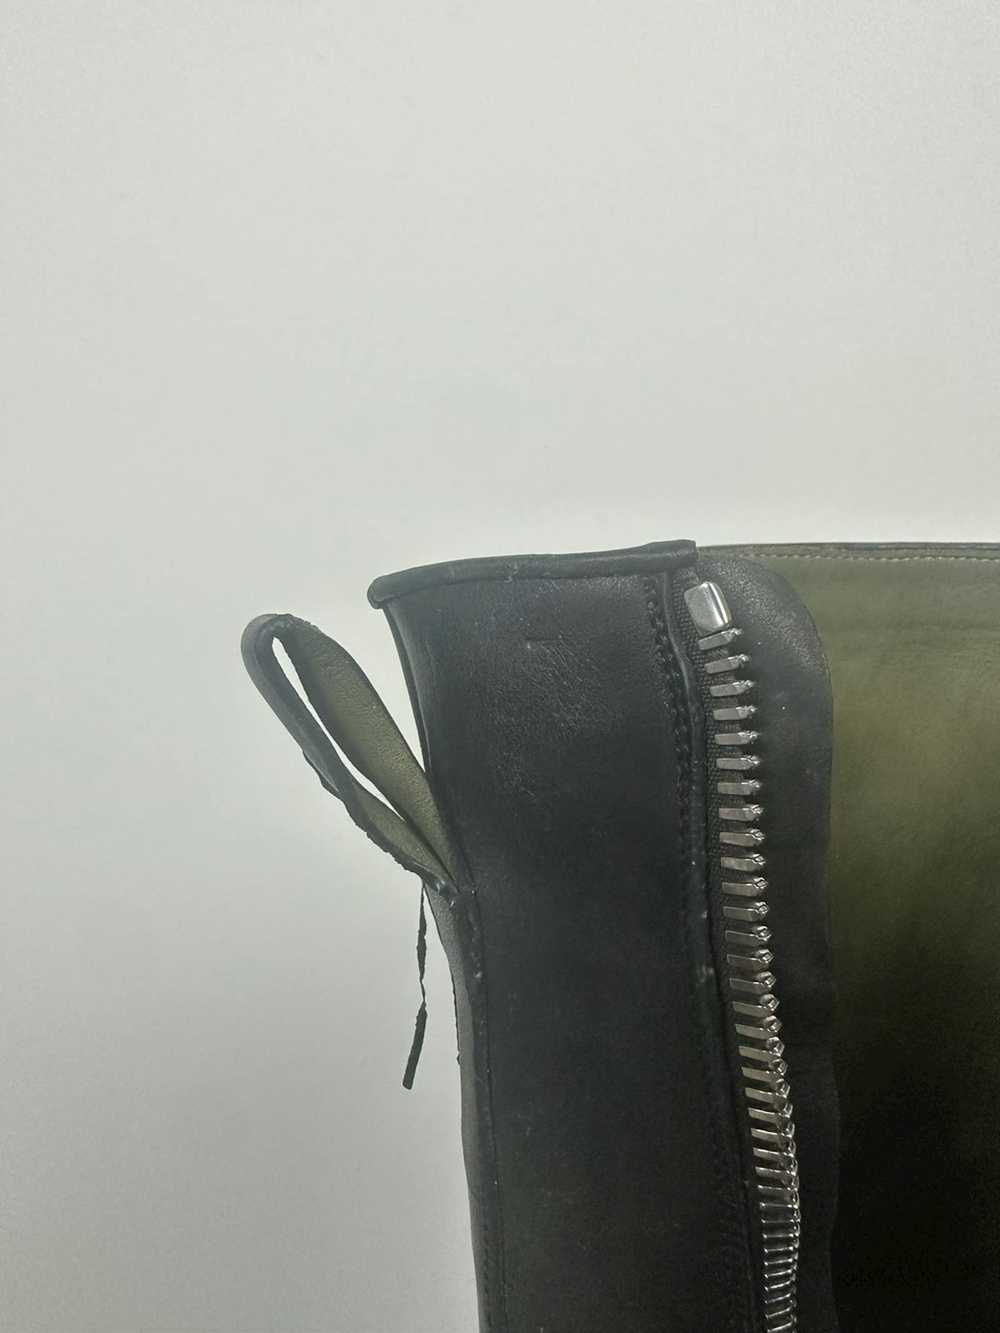 Rick Owens SS19 ‘BABEL’ Square Toe Wedge Boots - image 9